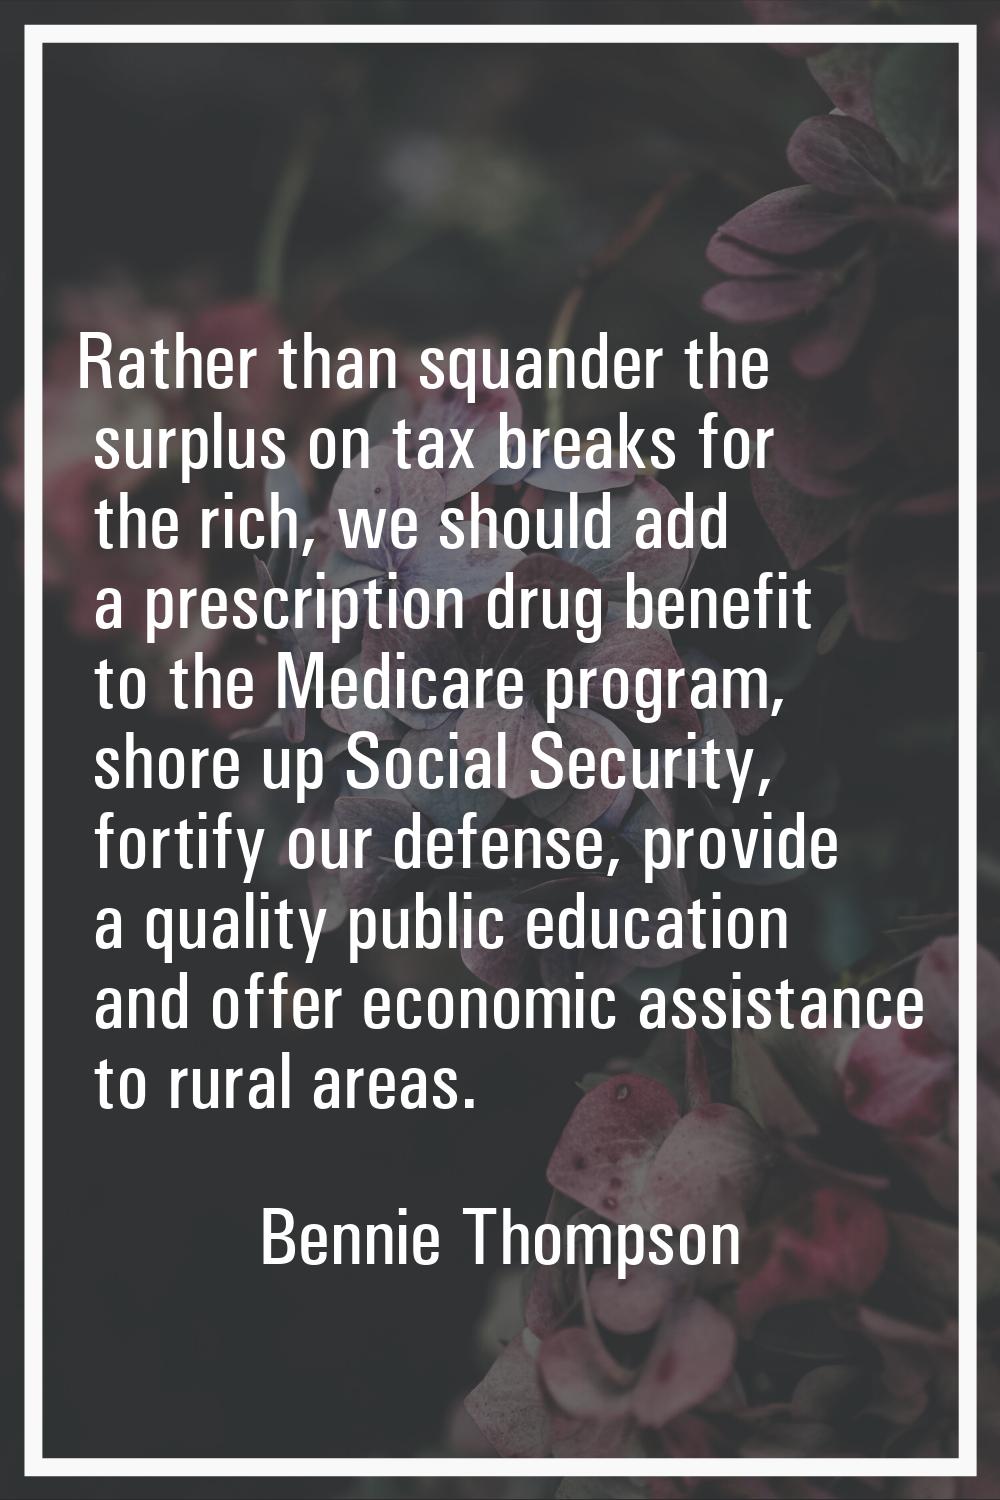 Rather than squander the surplus on tax breaks for the rich, we should add a prescription drug bene